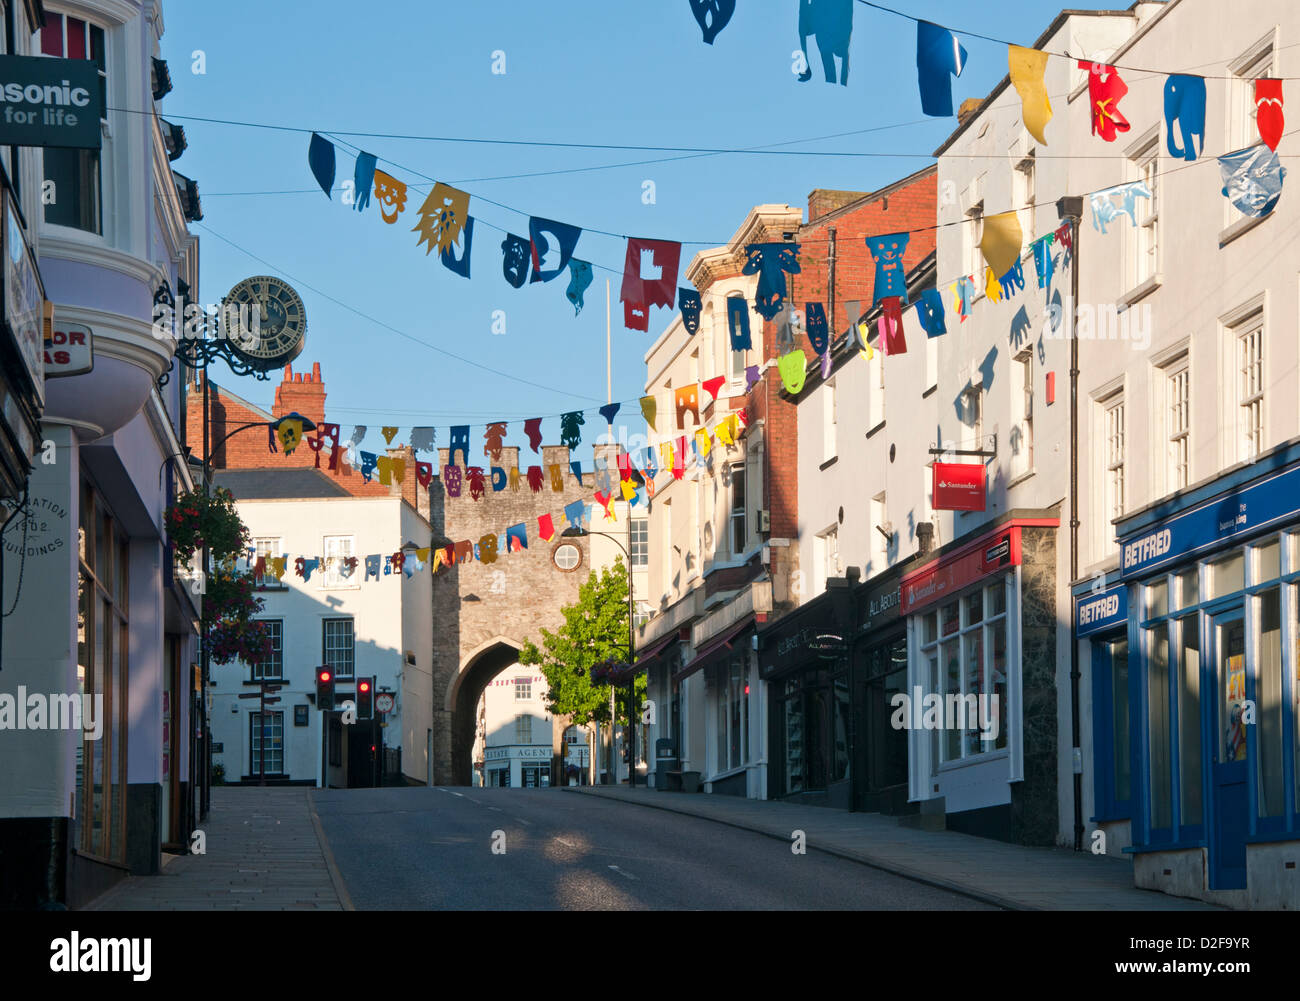 Chepstow High Street, Chepstow, Monmouthshire, South Wales, UK Stock Photo